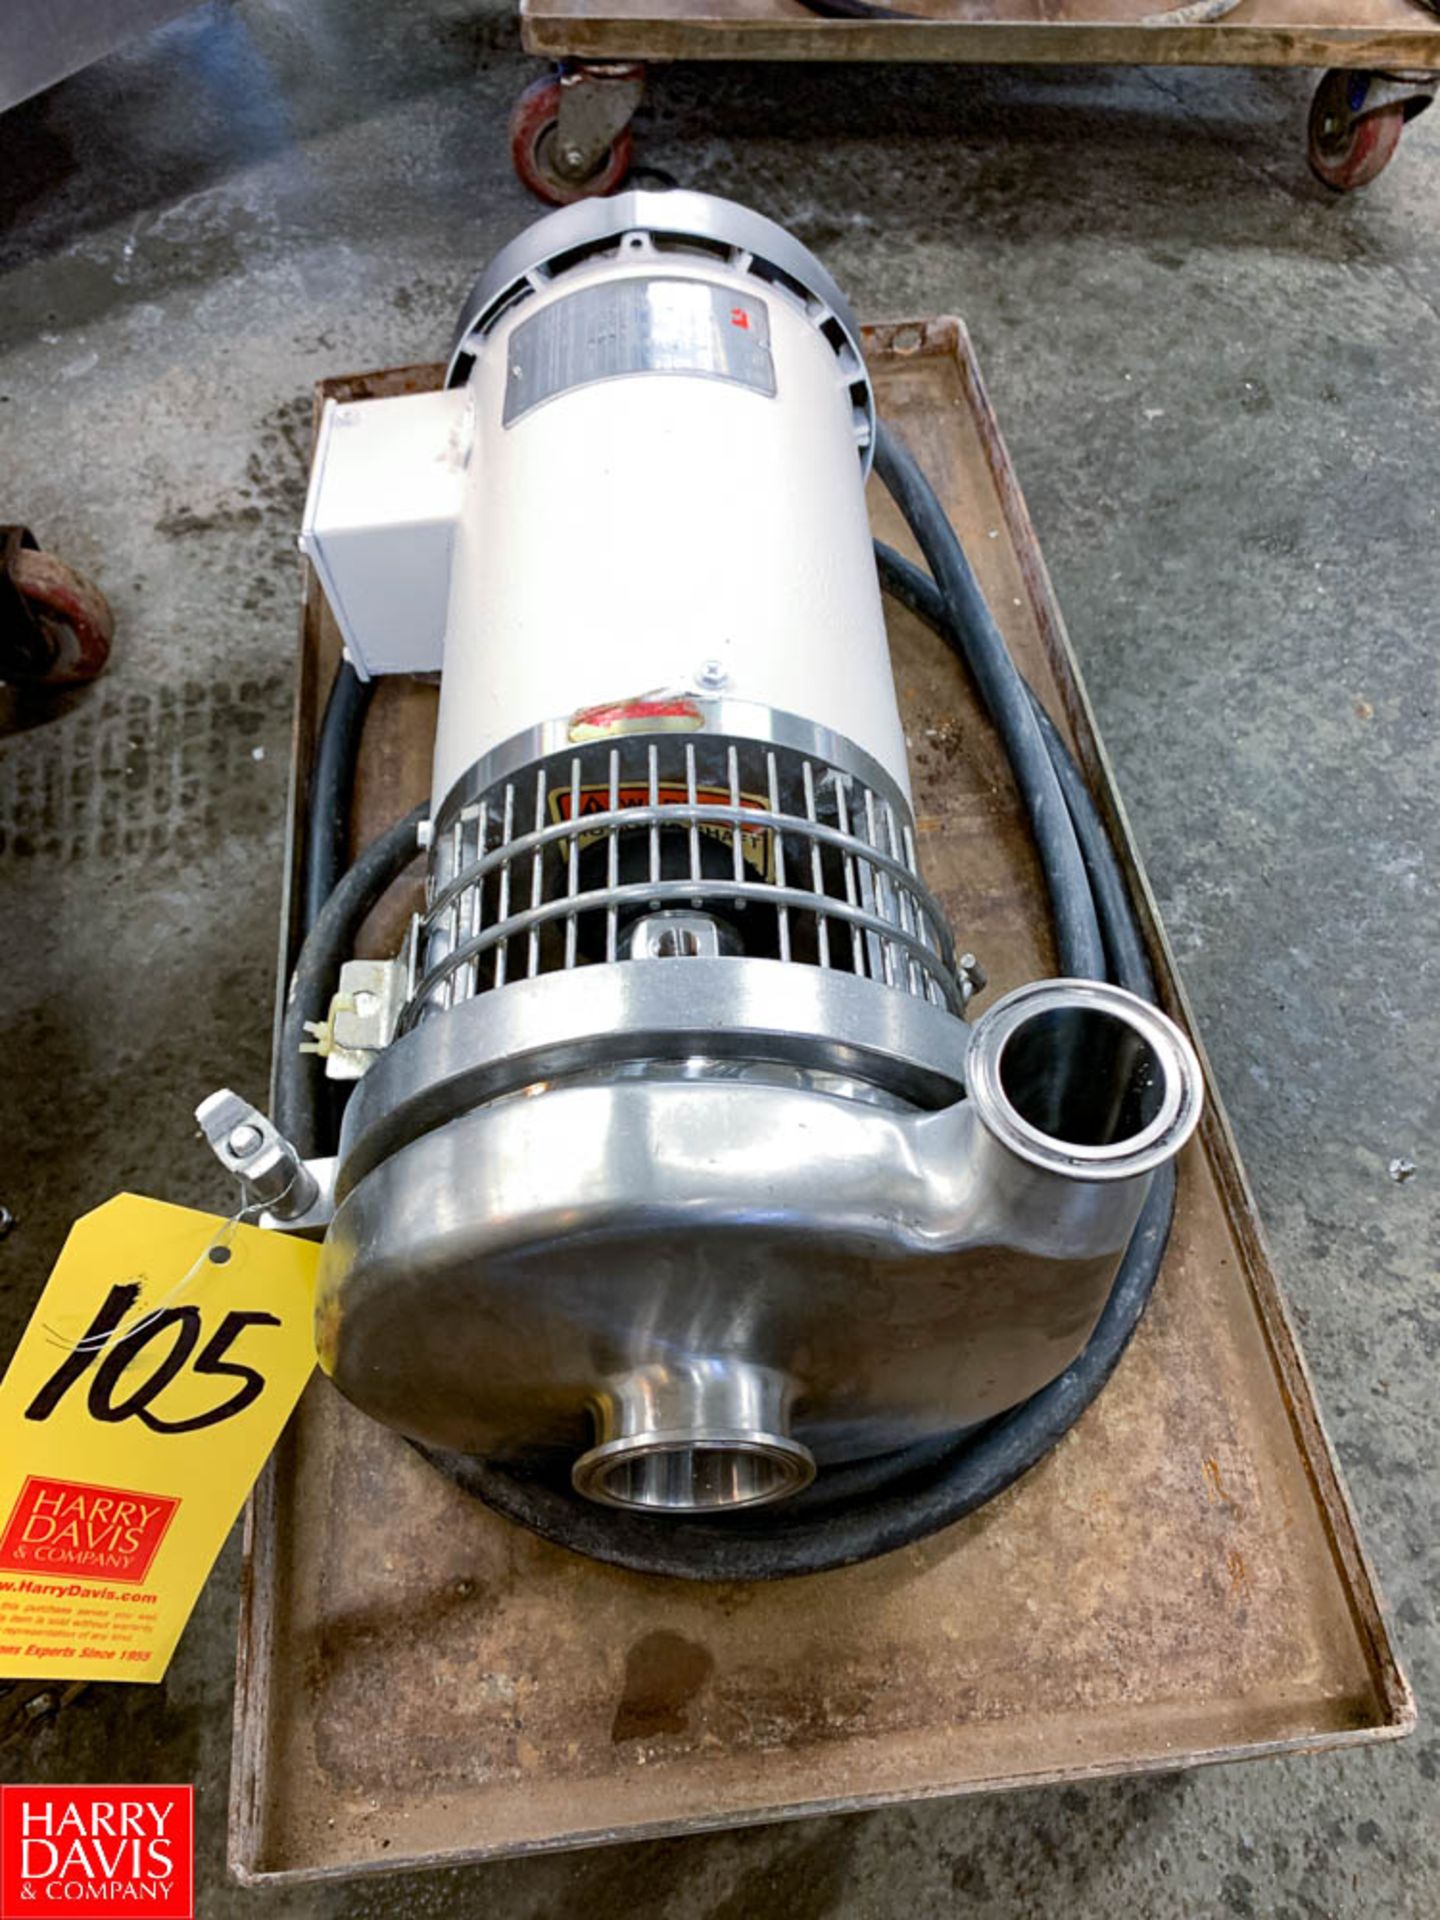 WCB Centrifugal Pump with Dayton 2 HP 1,740 RPM Motor and 2" x 1.5" S/S Head, Clamp Type, Located